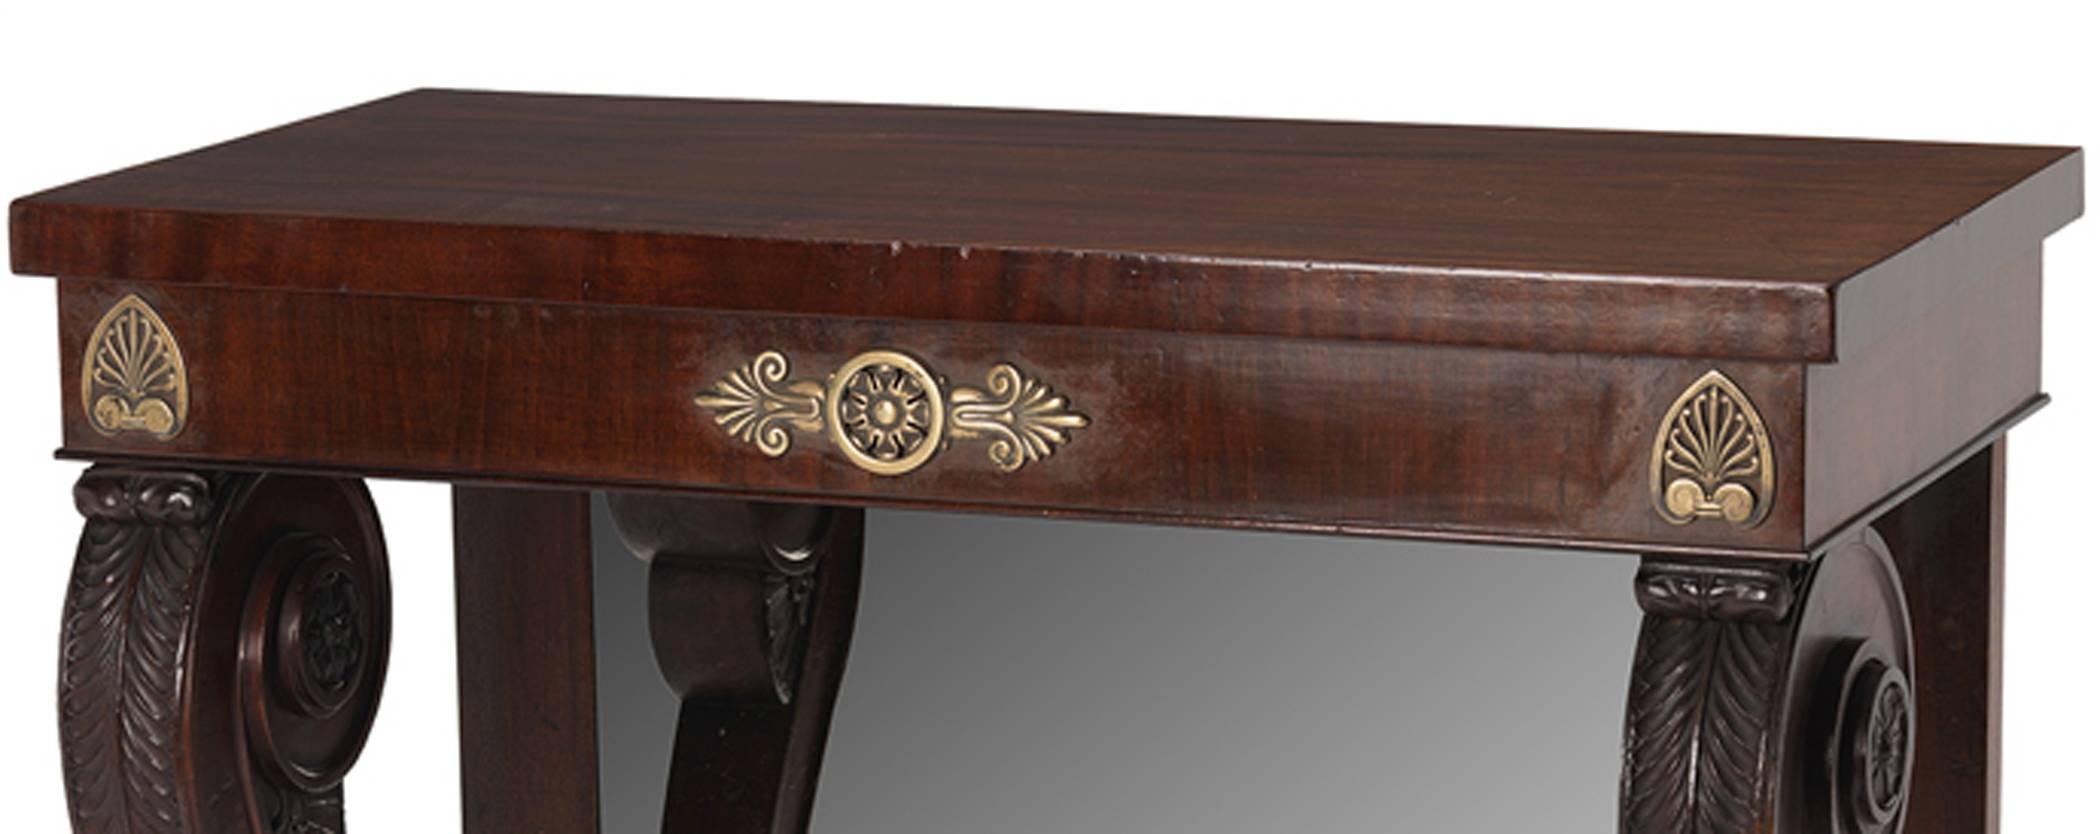 A pair of fabulous Regency manner design mahogany brass-mounted console tables. These consoles were constructed from all old elements and appear to be completely of the period but were obviously later assembled. The quality and color are quite